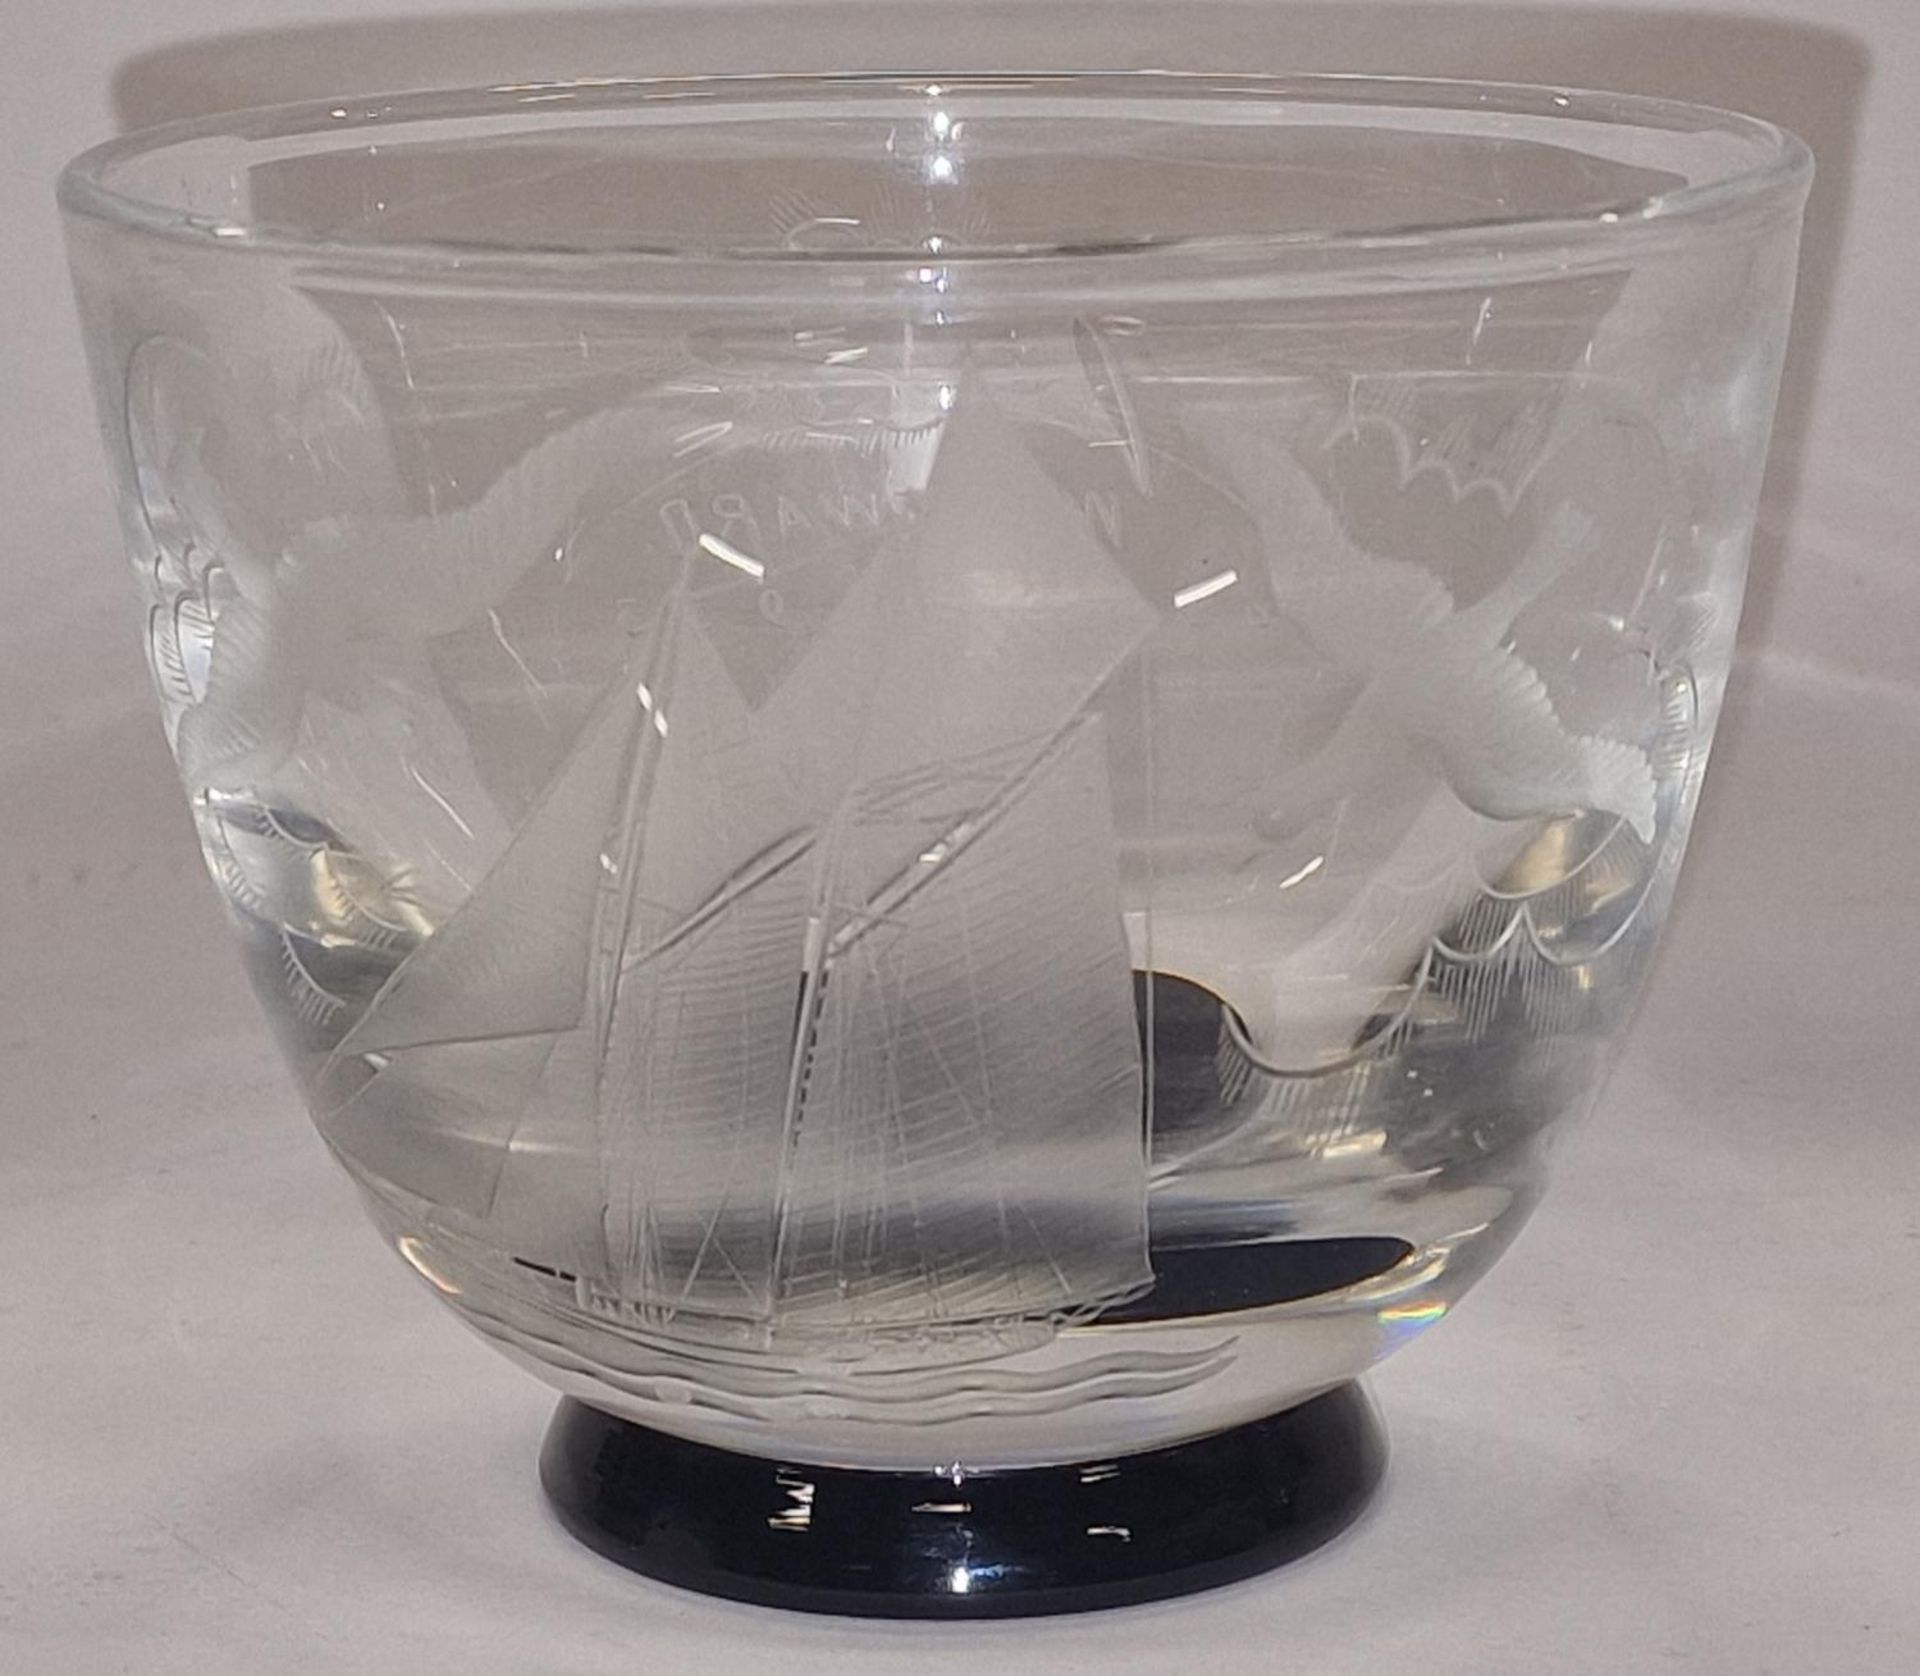 Vintage Hadeland glass bowl to commemorate visiting oslo in 1933. Signed to base 13cm diameter at